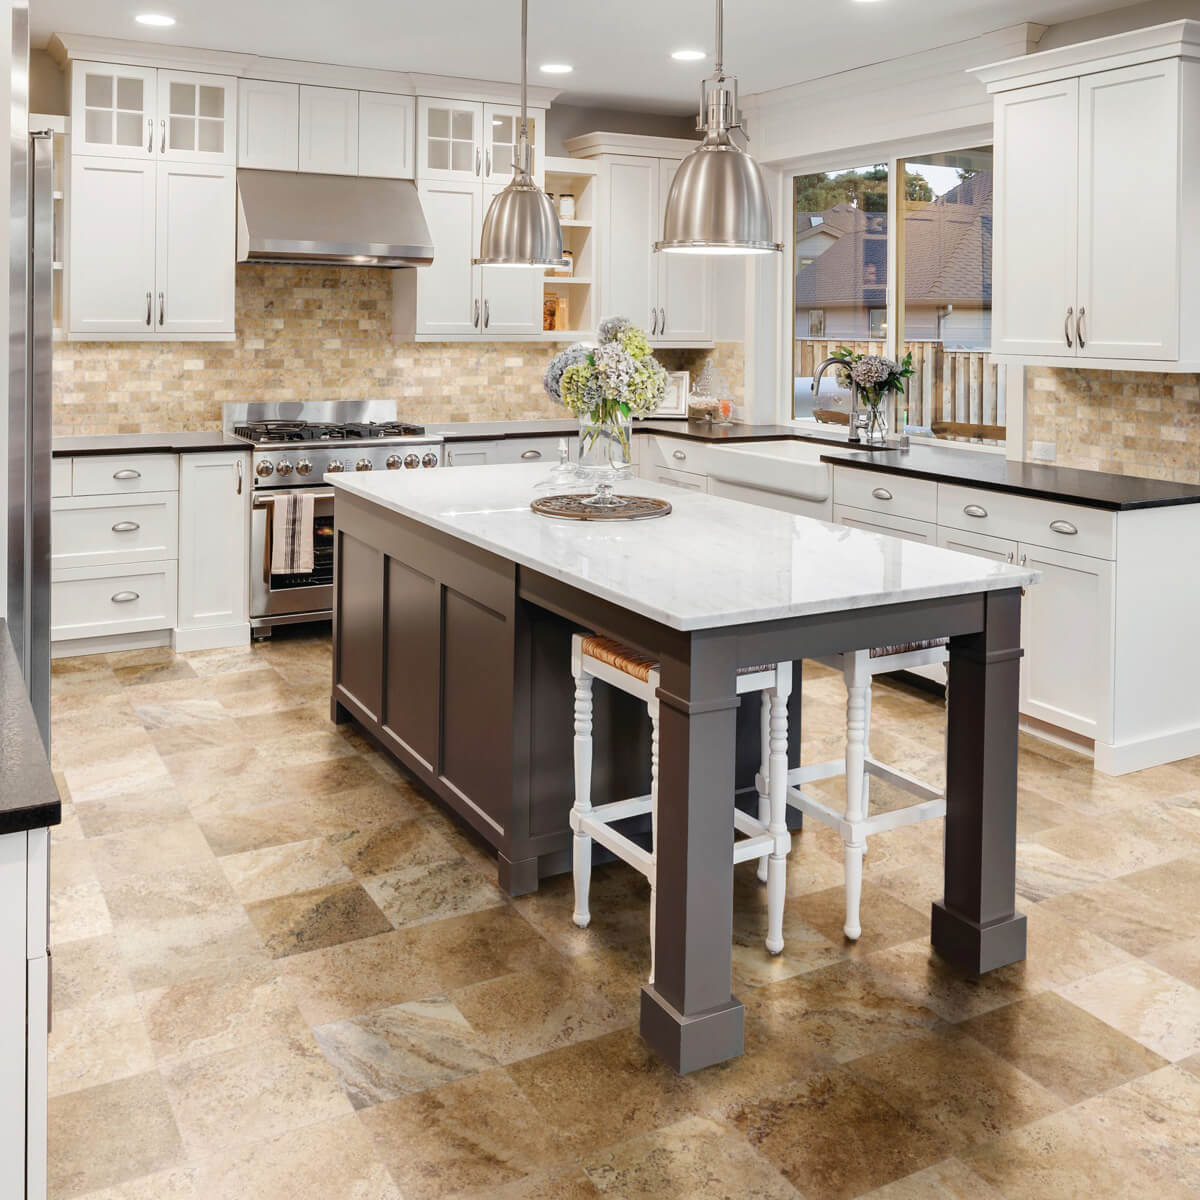 Kitchen cabinets & countertop